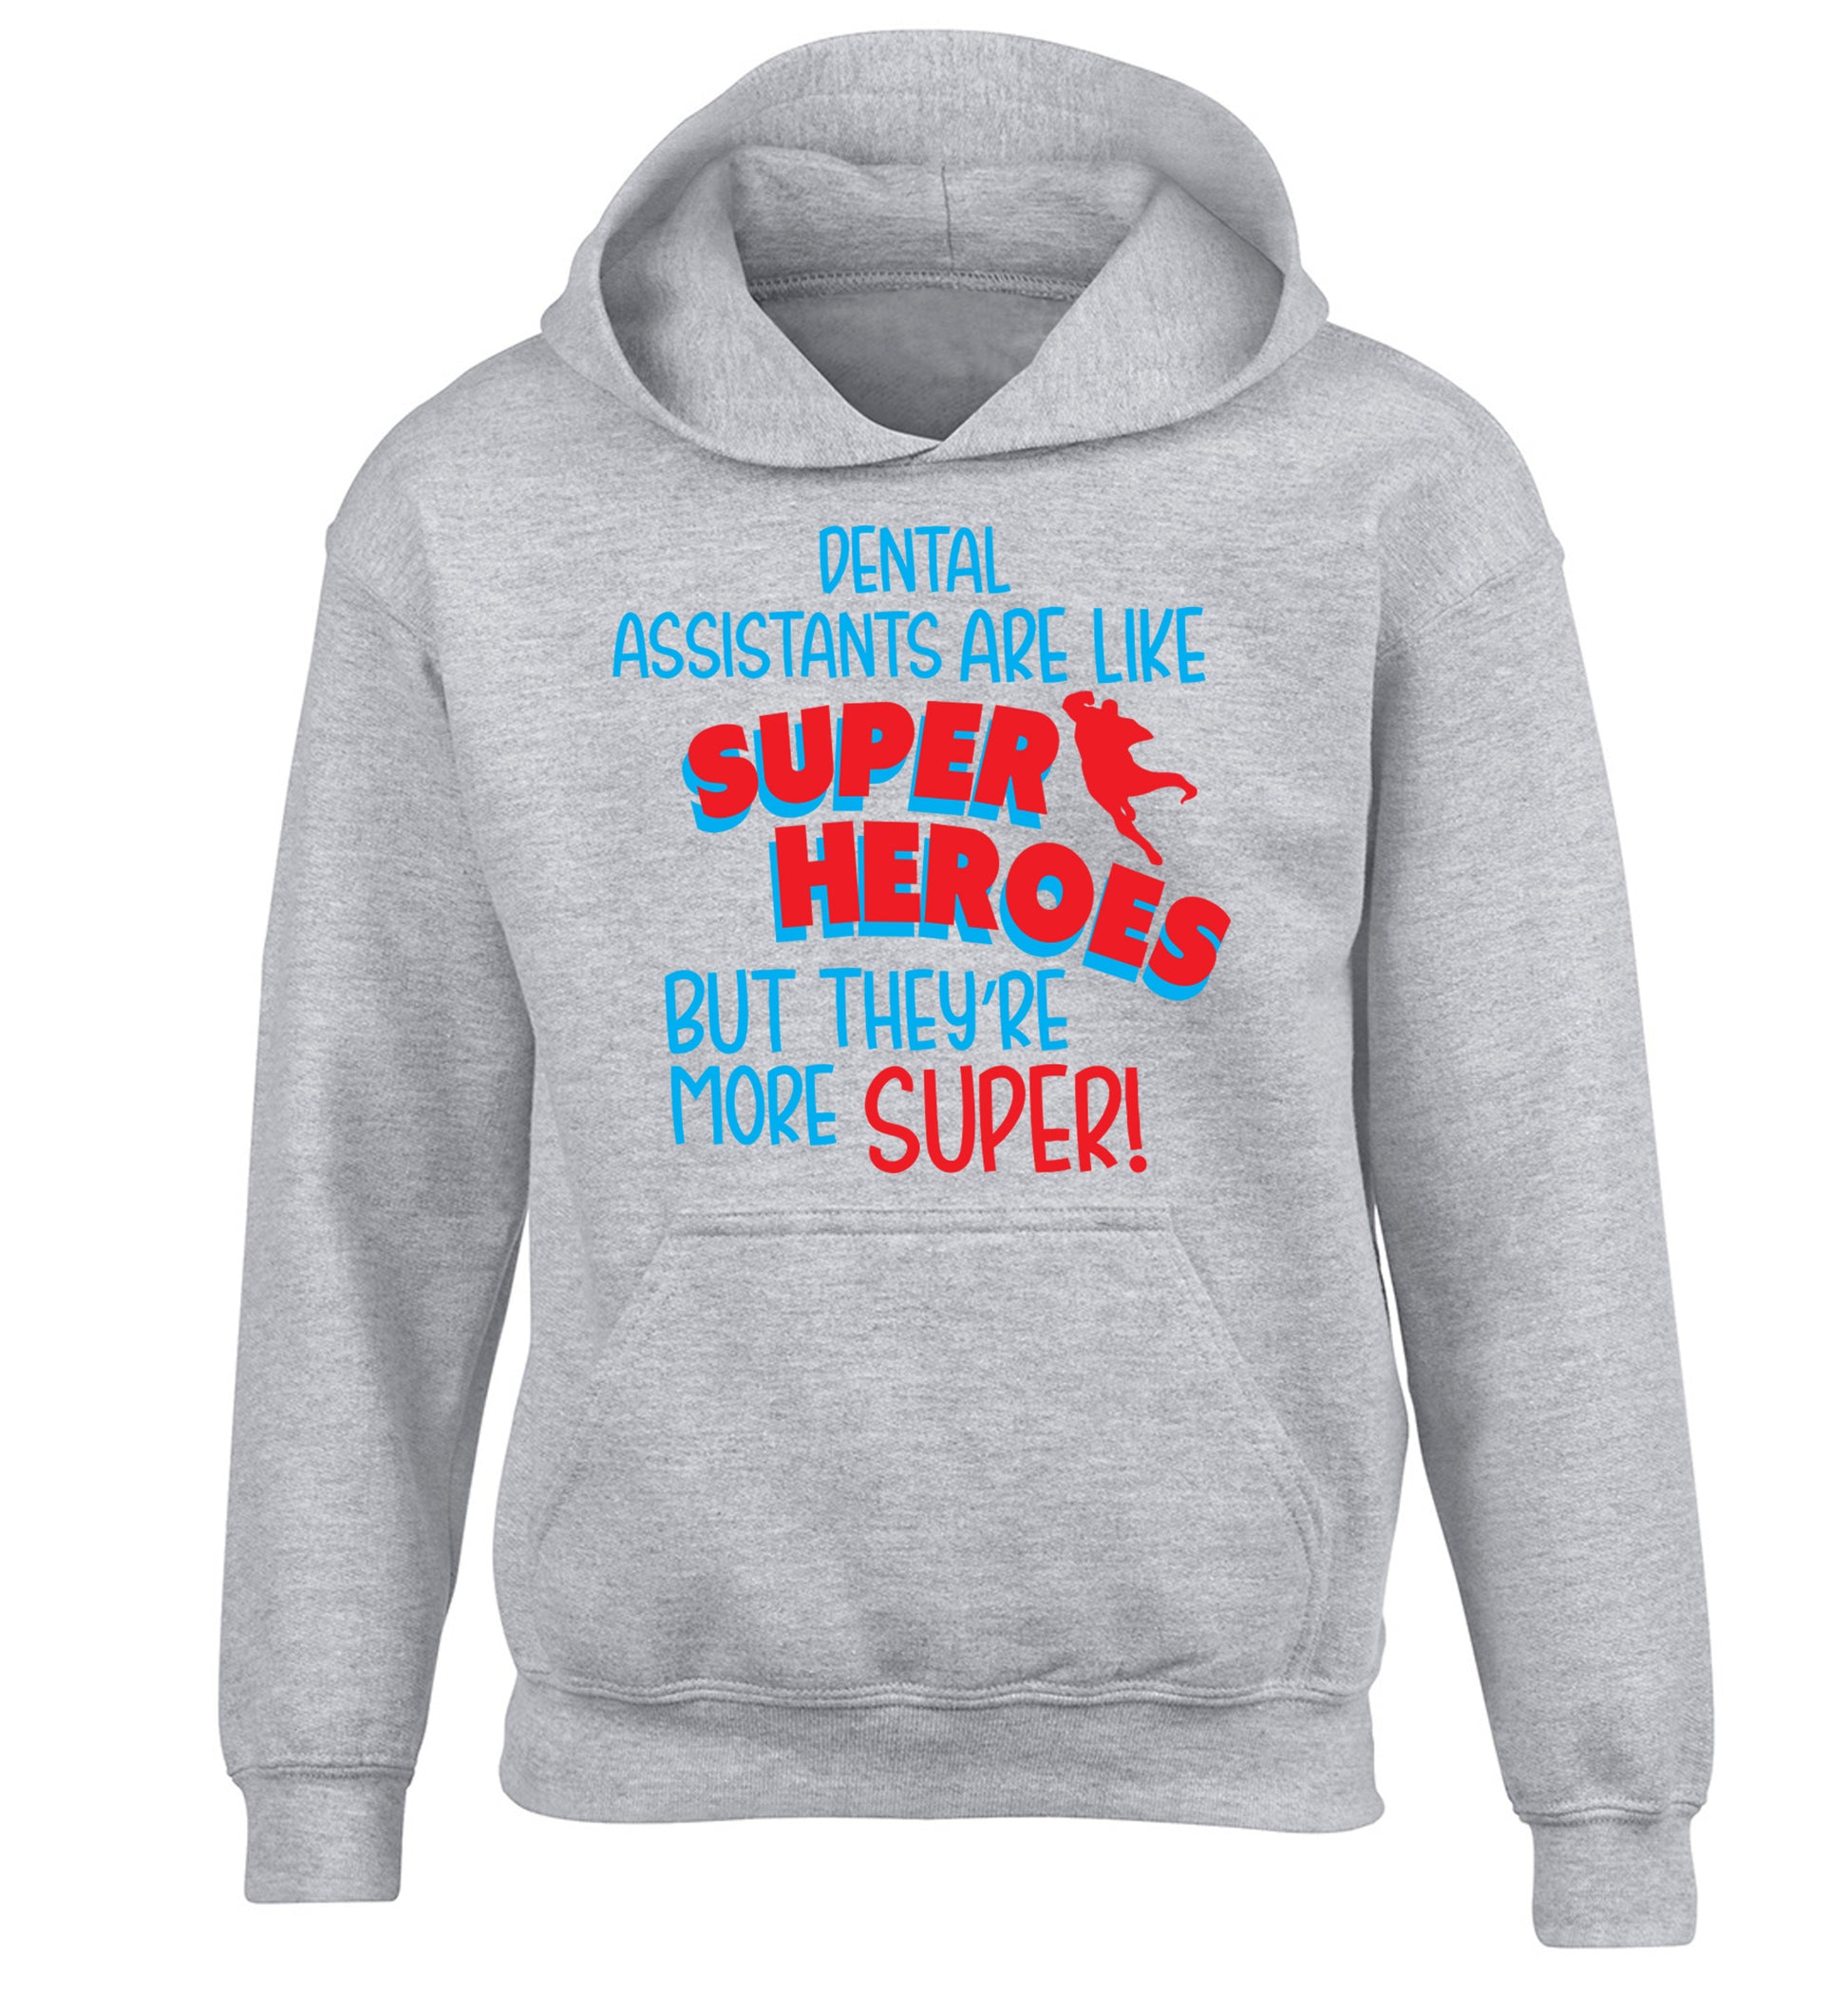 Dental Assistants are like superheros but they're more super children's grey hoodie 12-13 Years